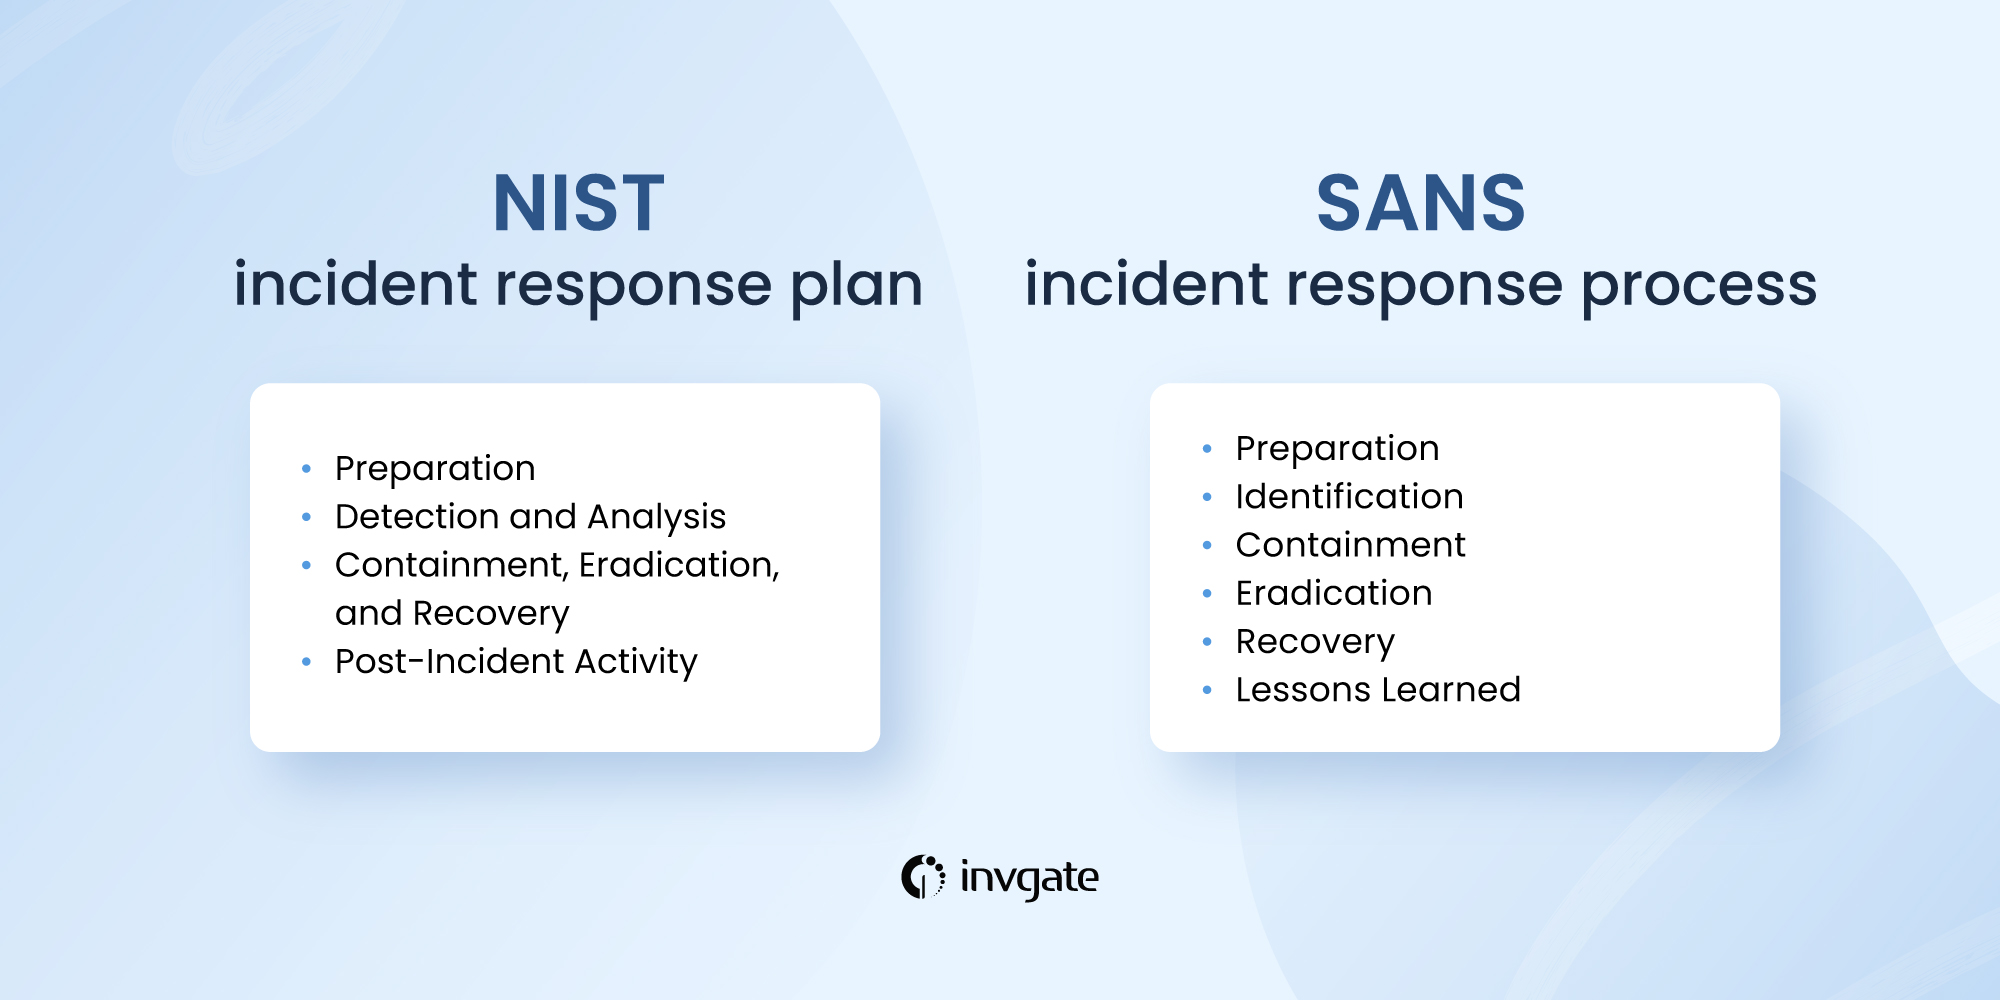 NIST and SANS represent to diffrent approaches to incident management